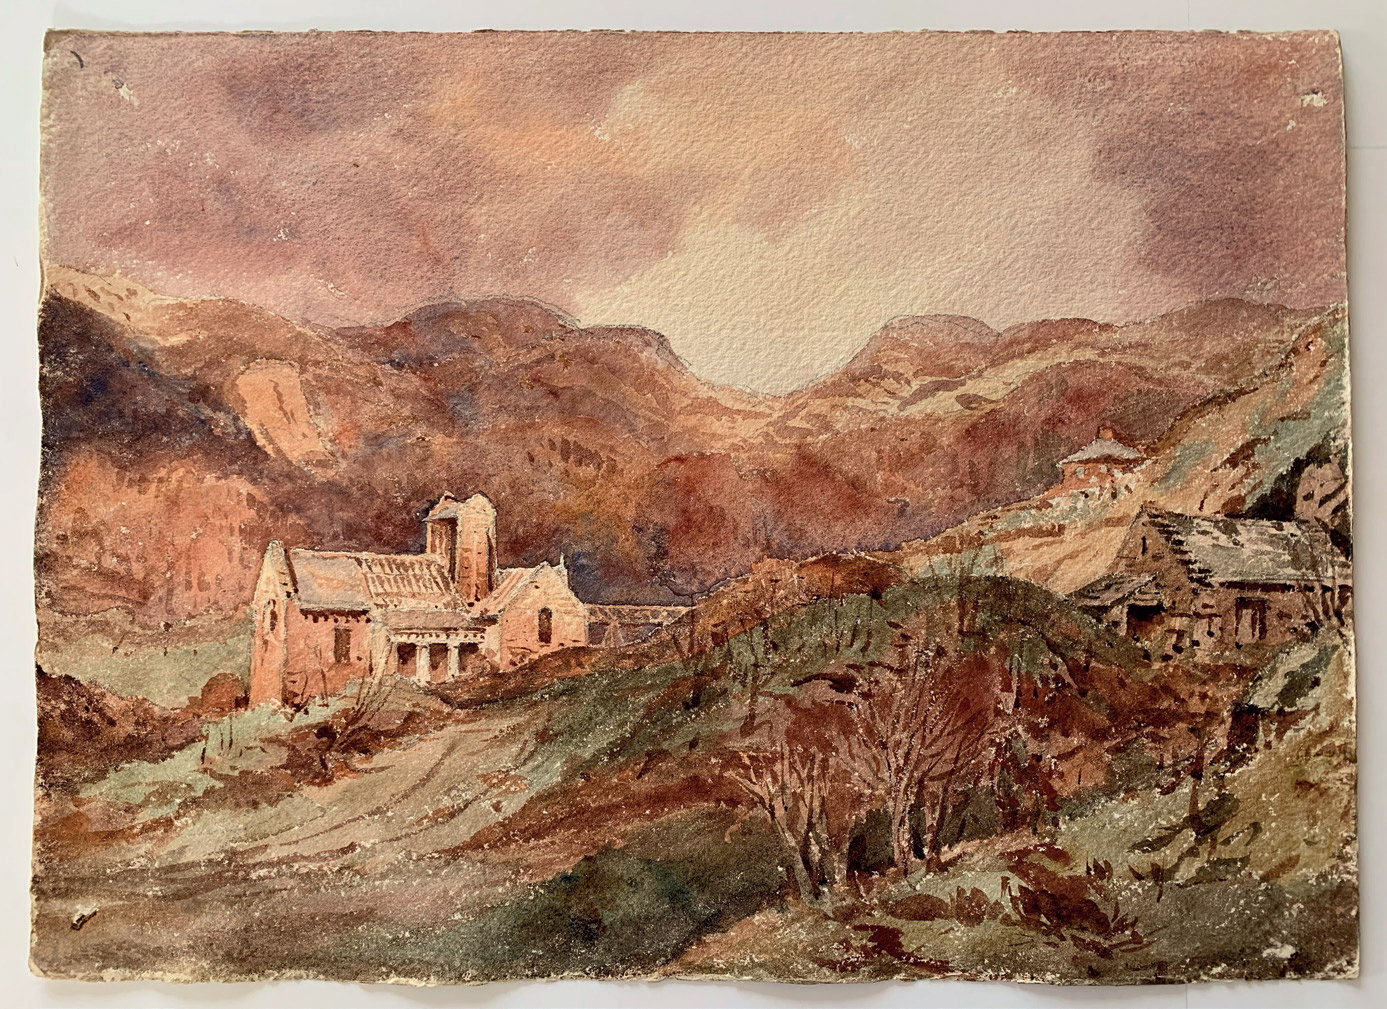 One of the Reverend John Louis Petit's watercolours showing the construction of St Philips set against the romanticised landscape